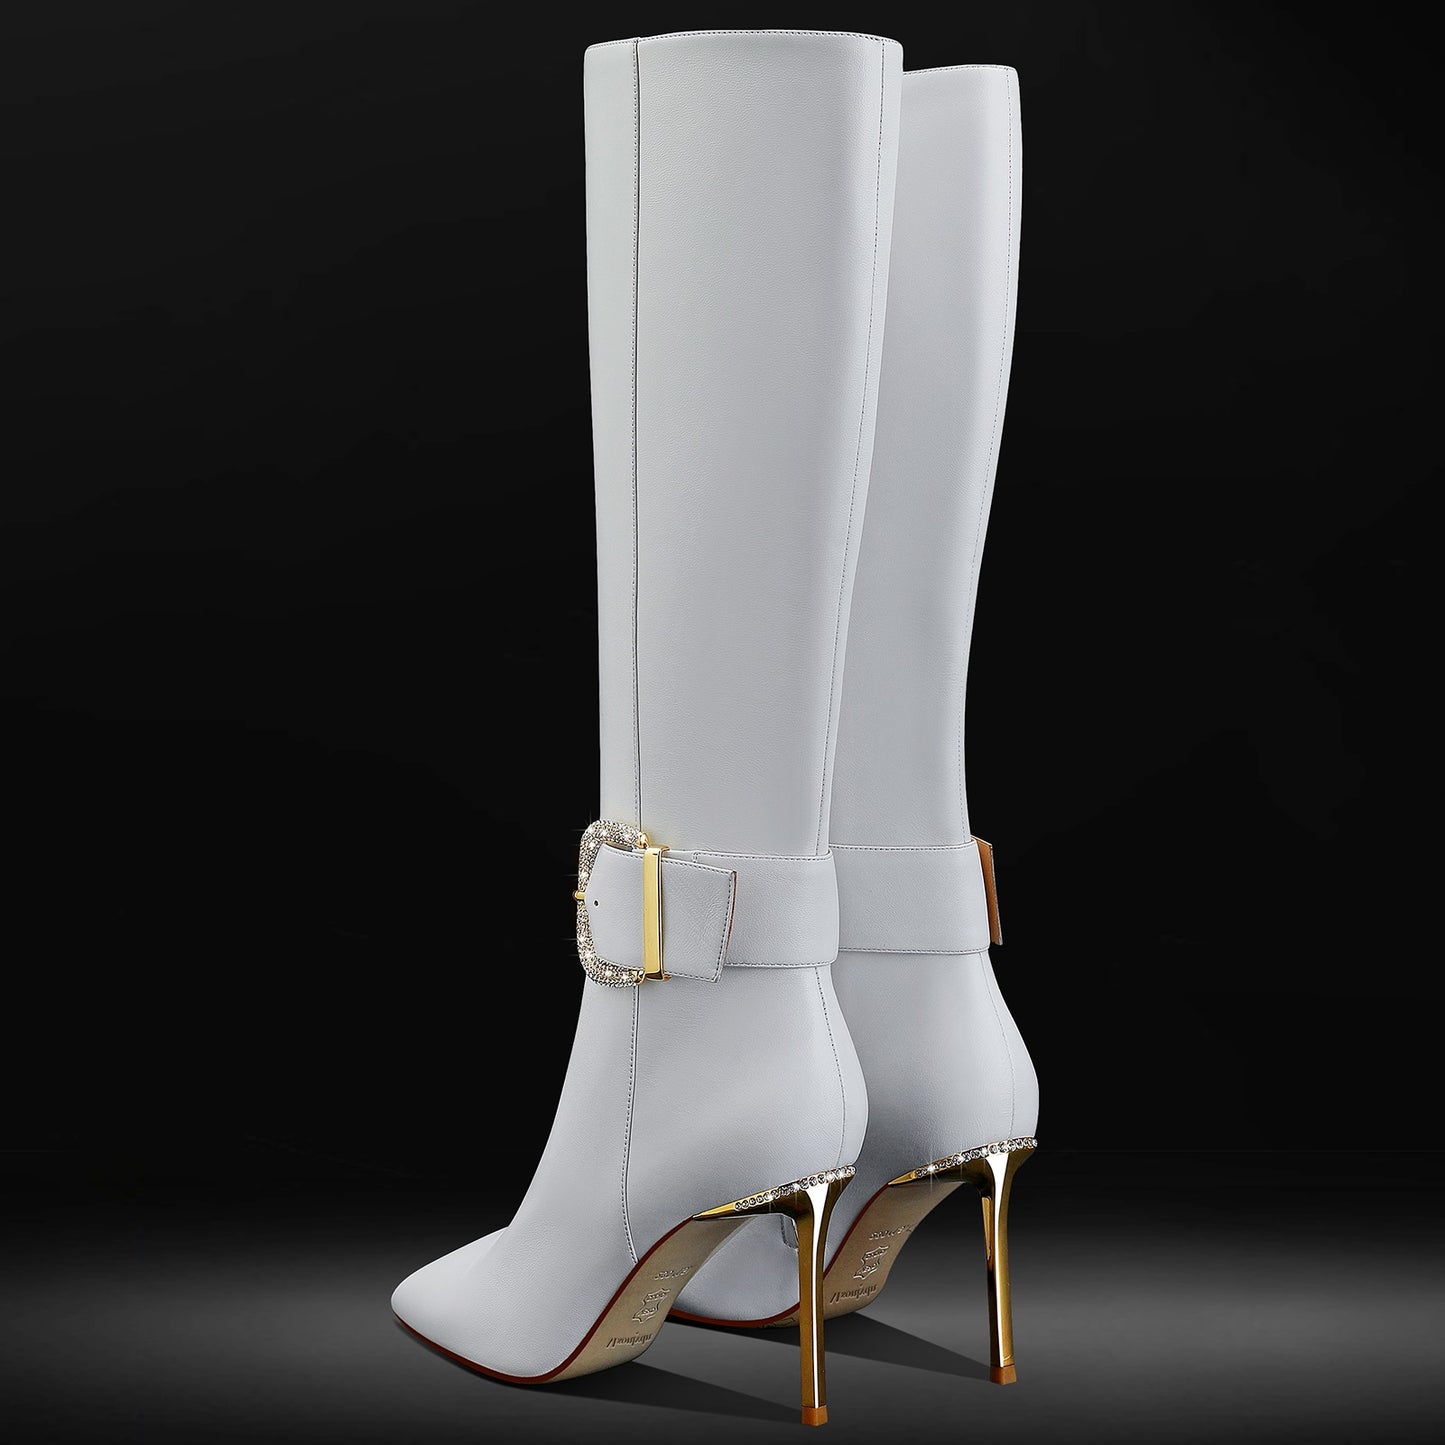 High Heels Long Boots,Zip Leather Knee Boots Pointed Toe Stiletto